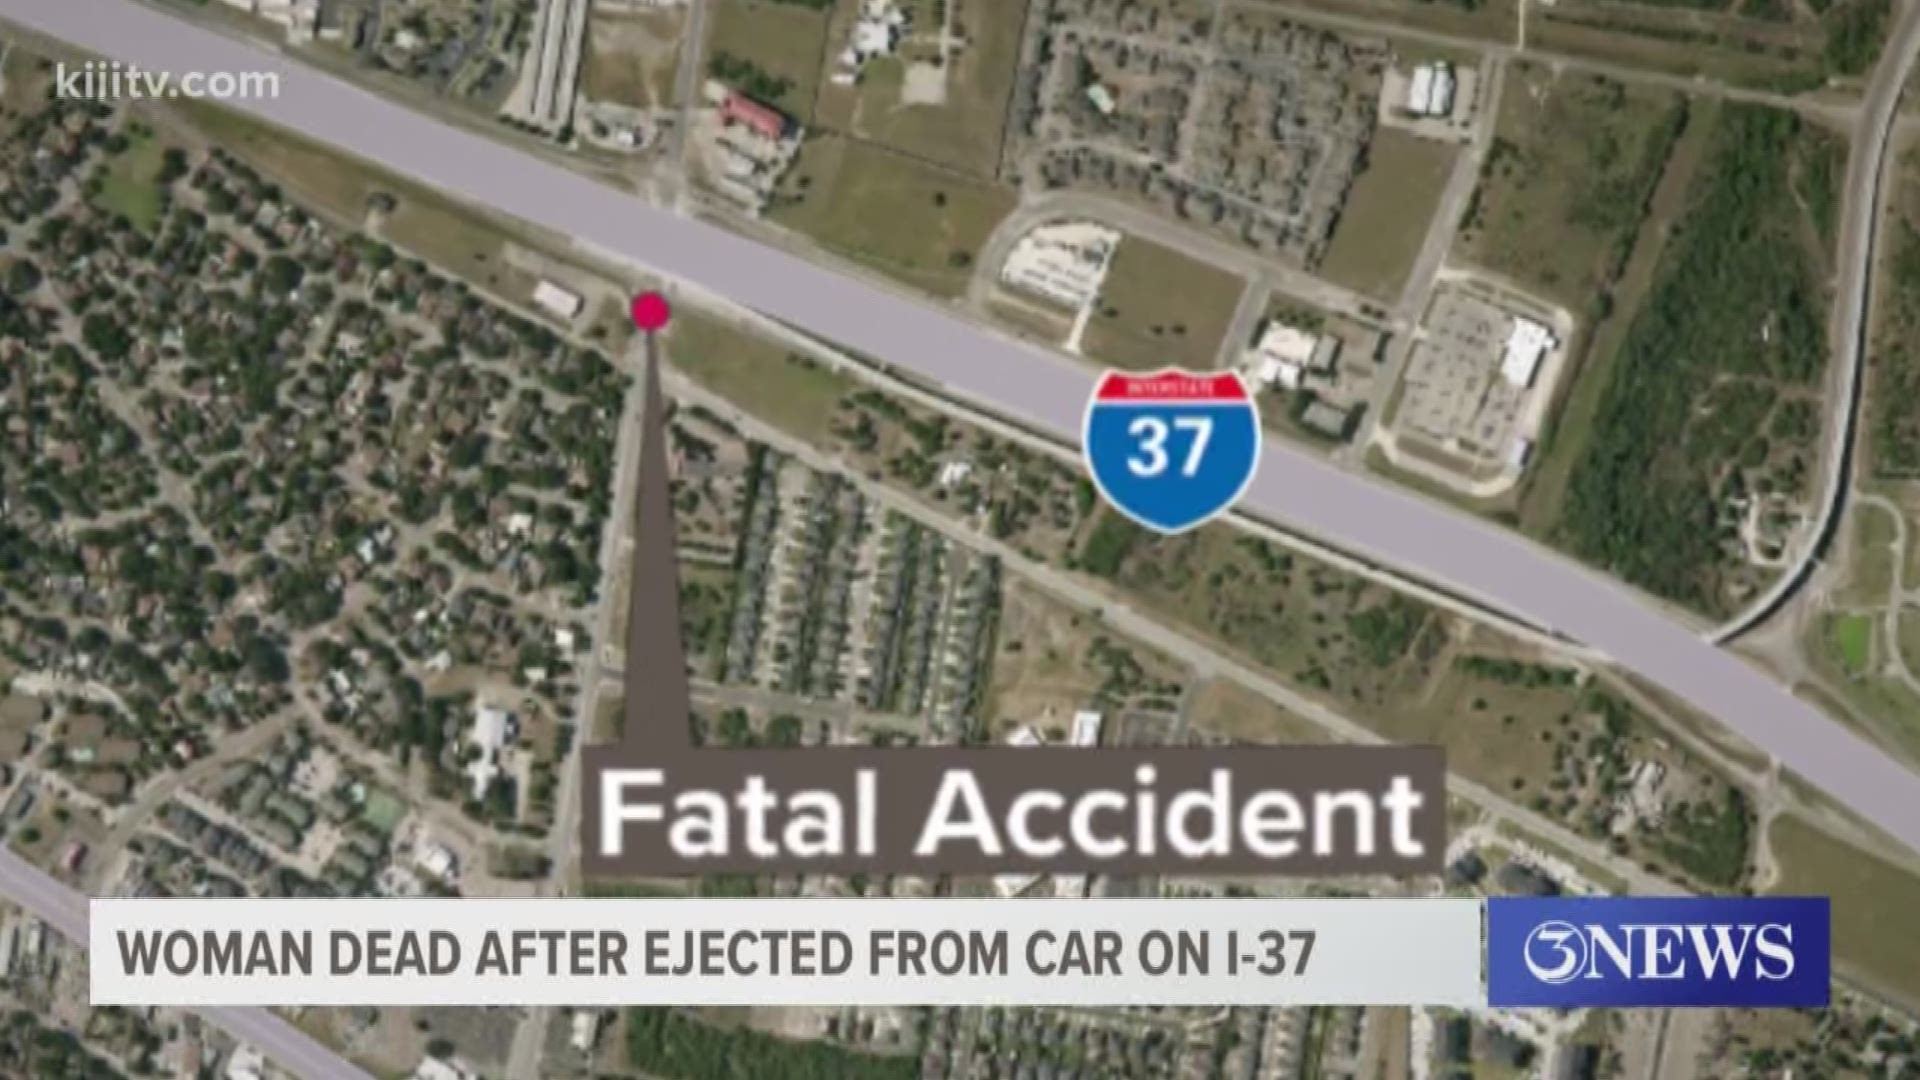 A 24-year old woman is dead after being hit by a vehicle on I-37 Saturday afternoon.